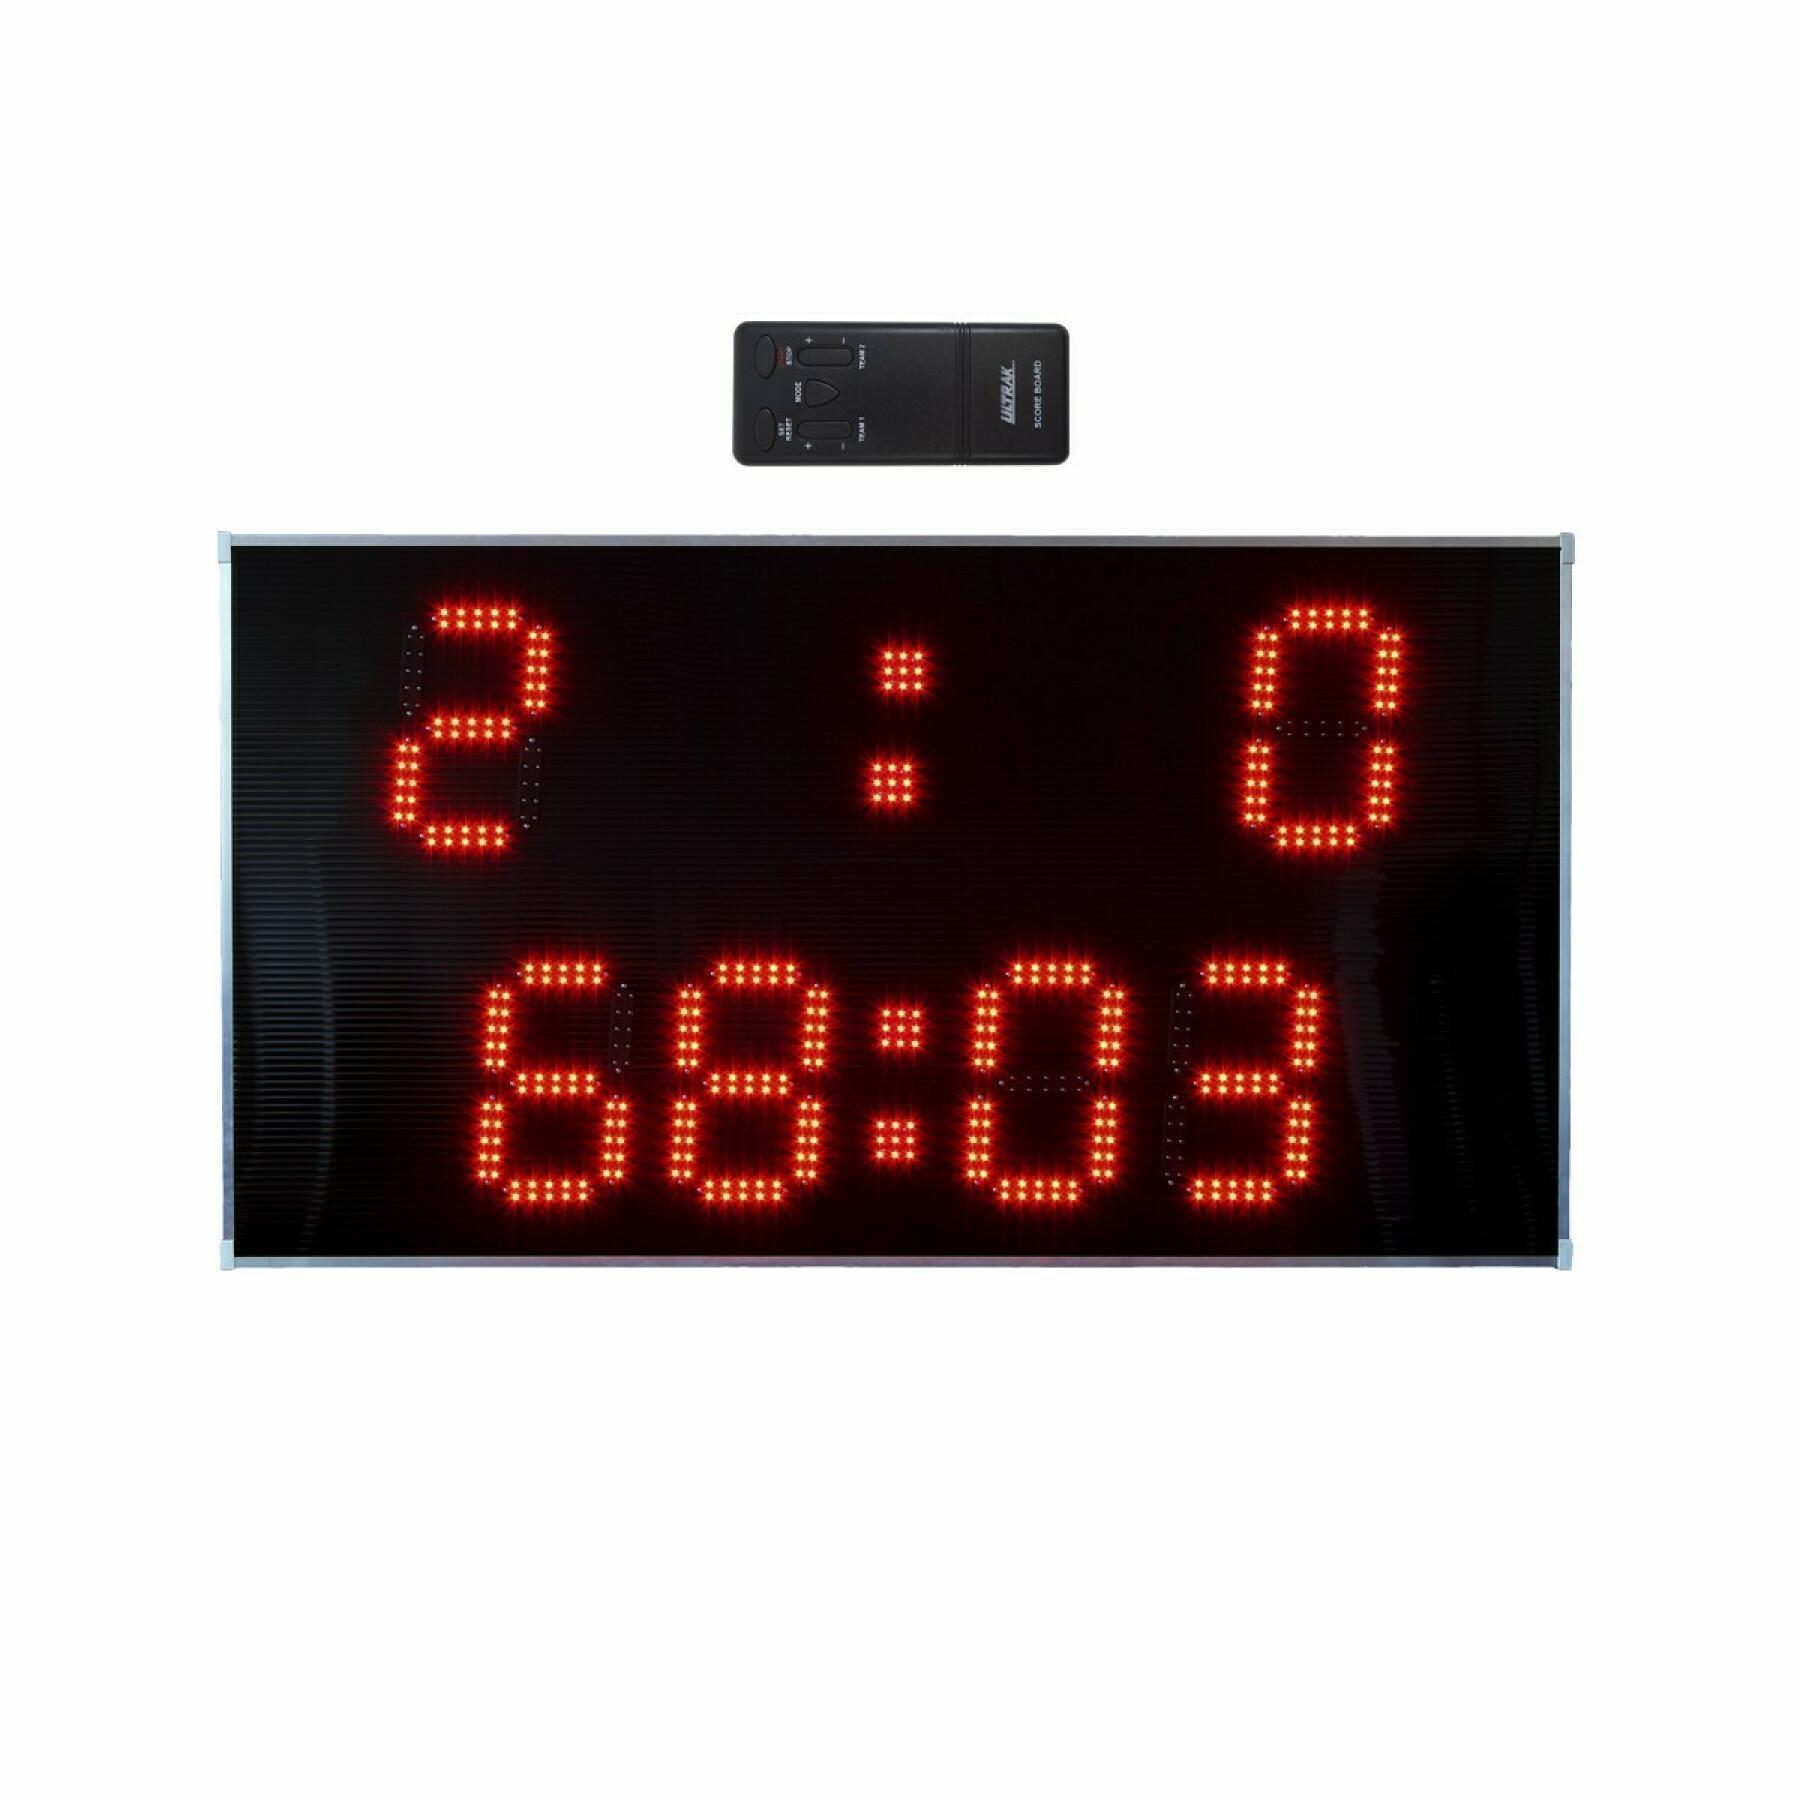 9 second display panel with remote control Sporti France Derby